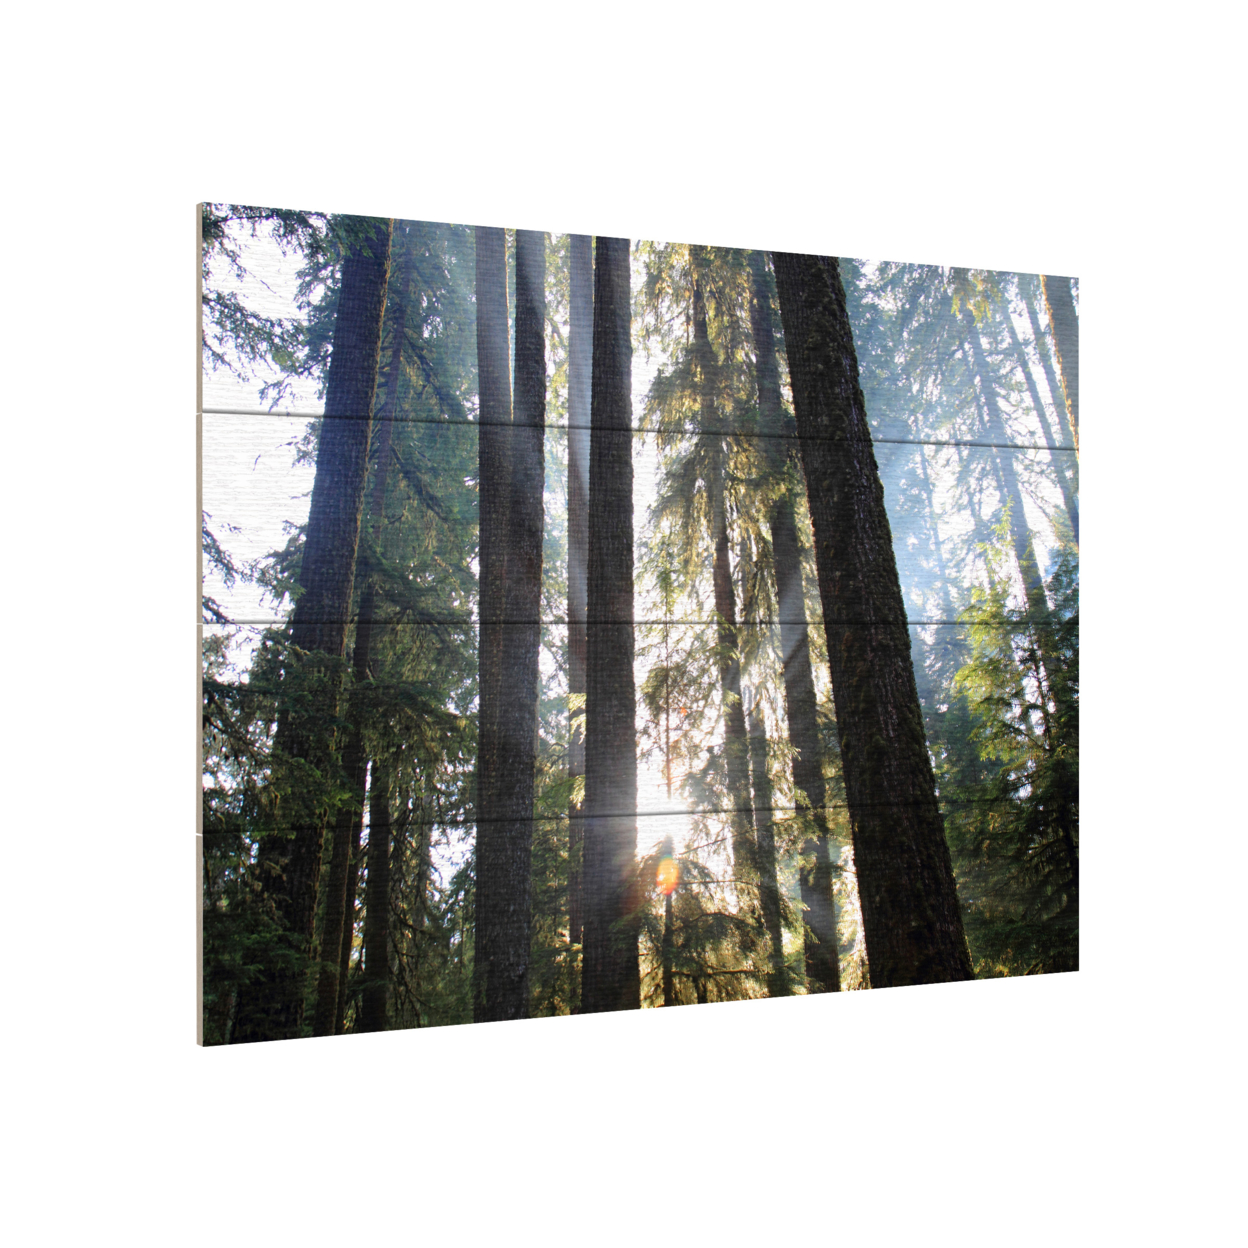 Wall Art 12 X 16 Inches Titled Sunrays Ready To Hang Printed On Wooden Planks